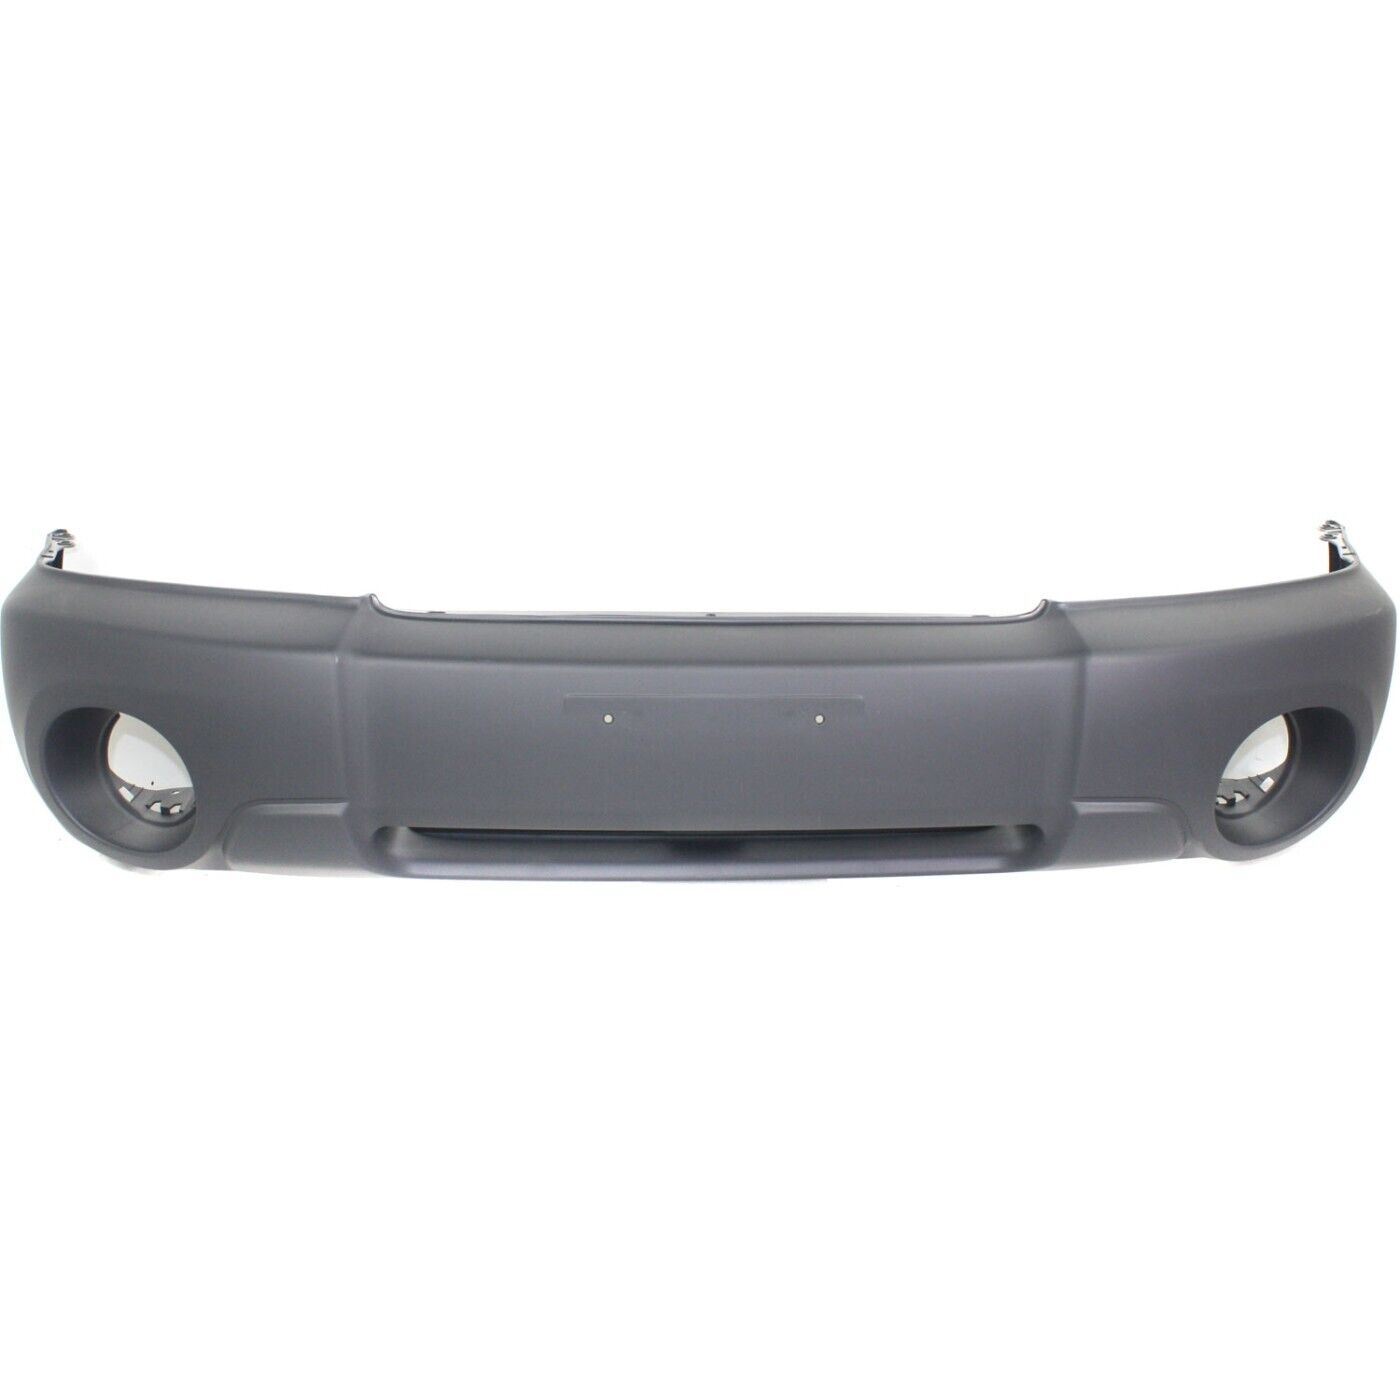 Front Bumper Cover For 2003-2005 Subaru Forester X Model Textured Plastic